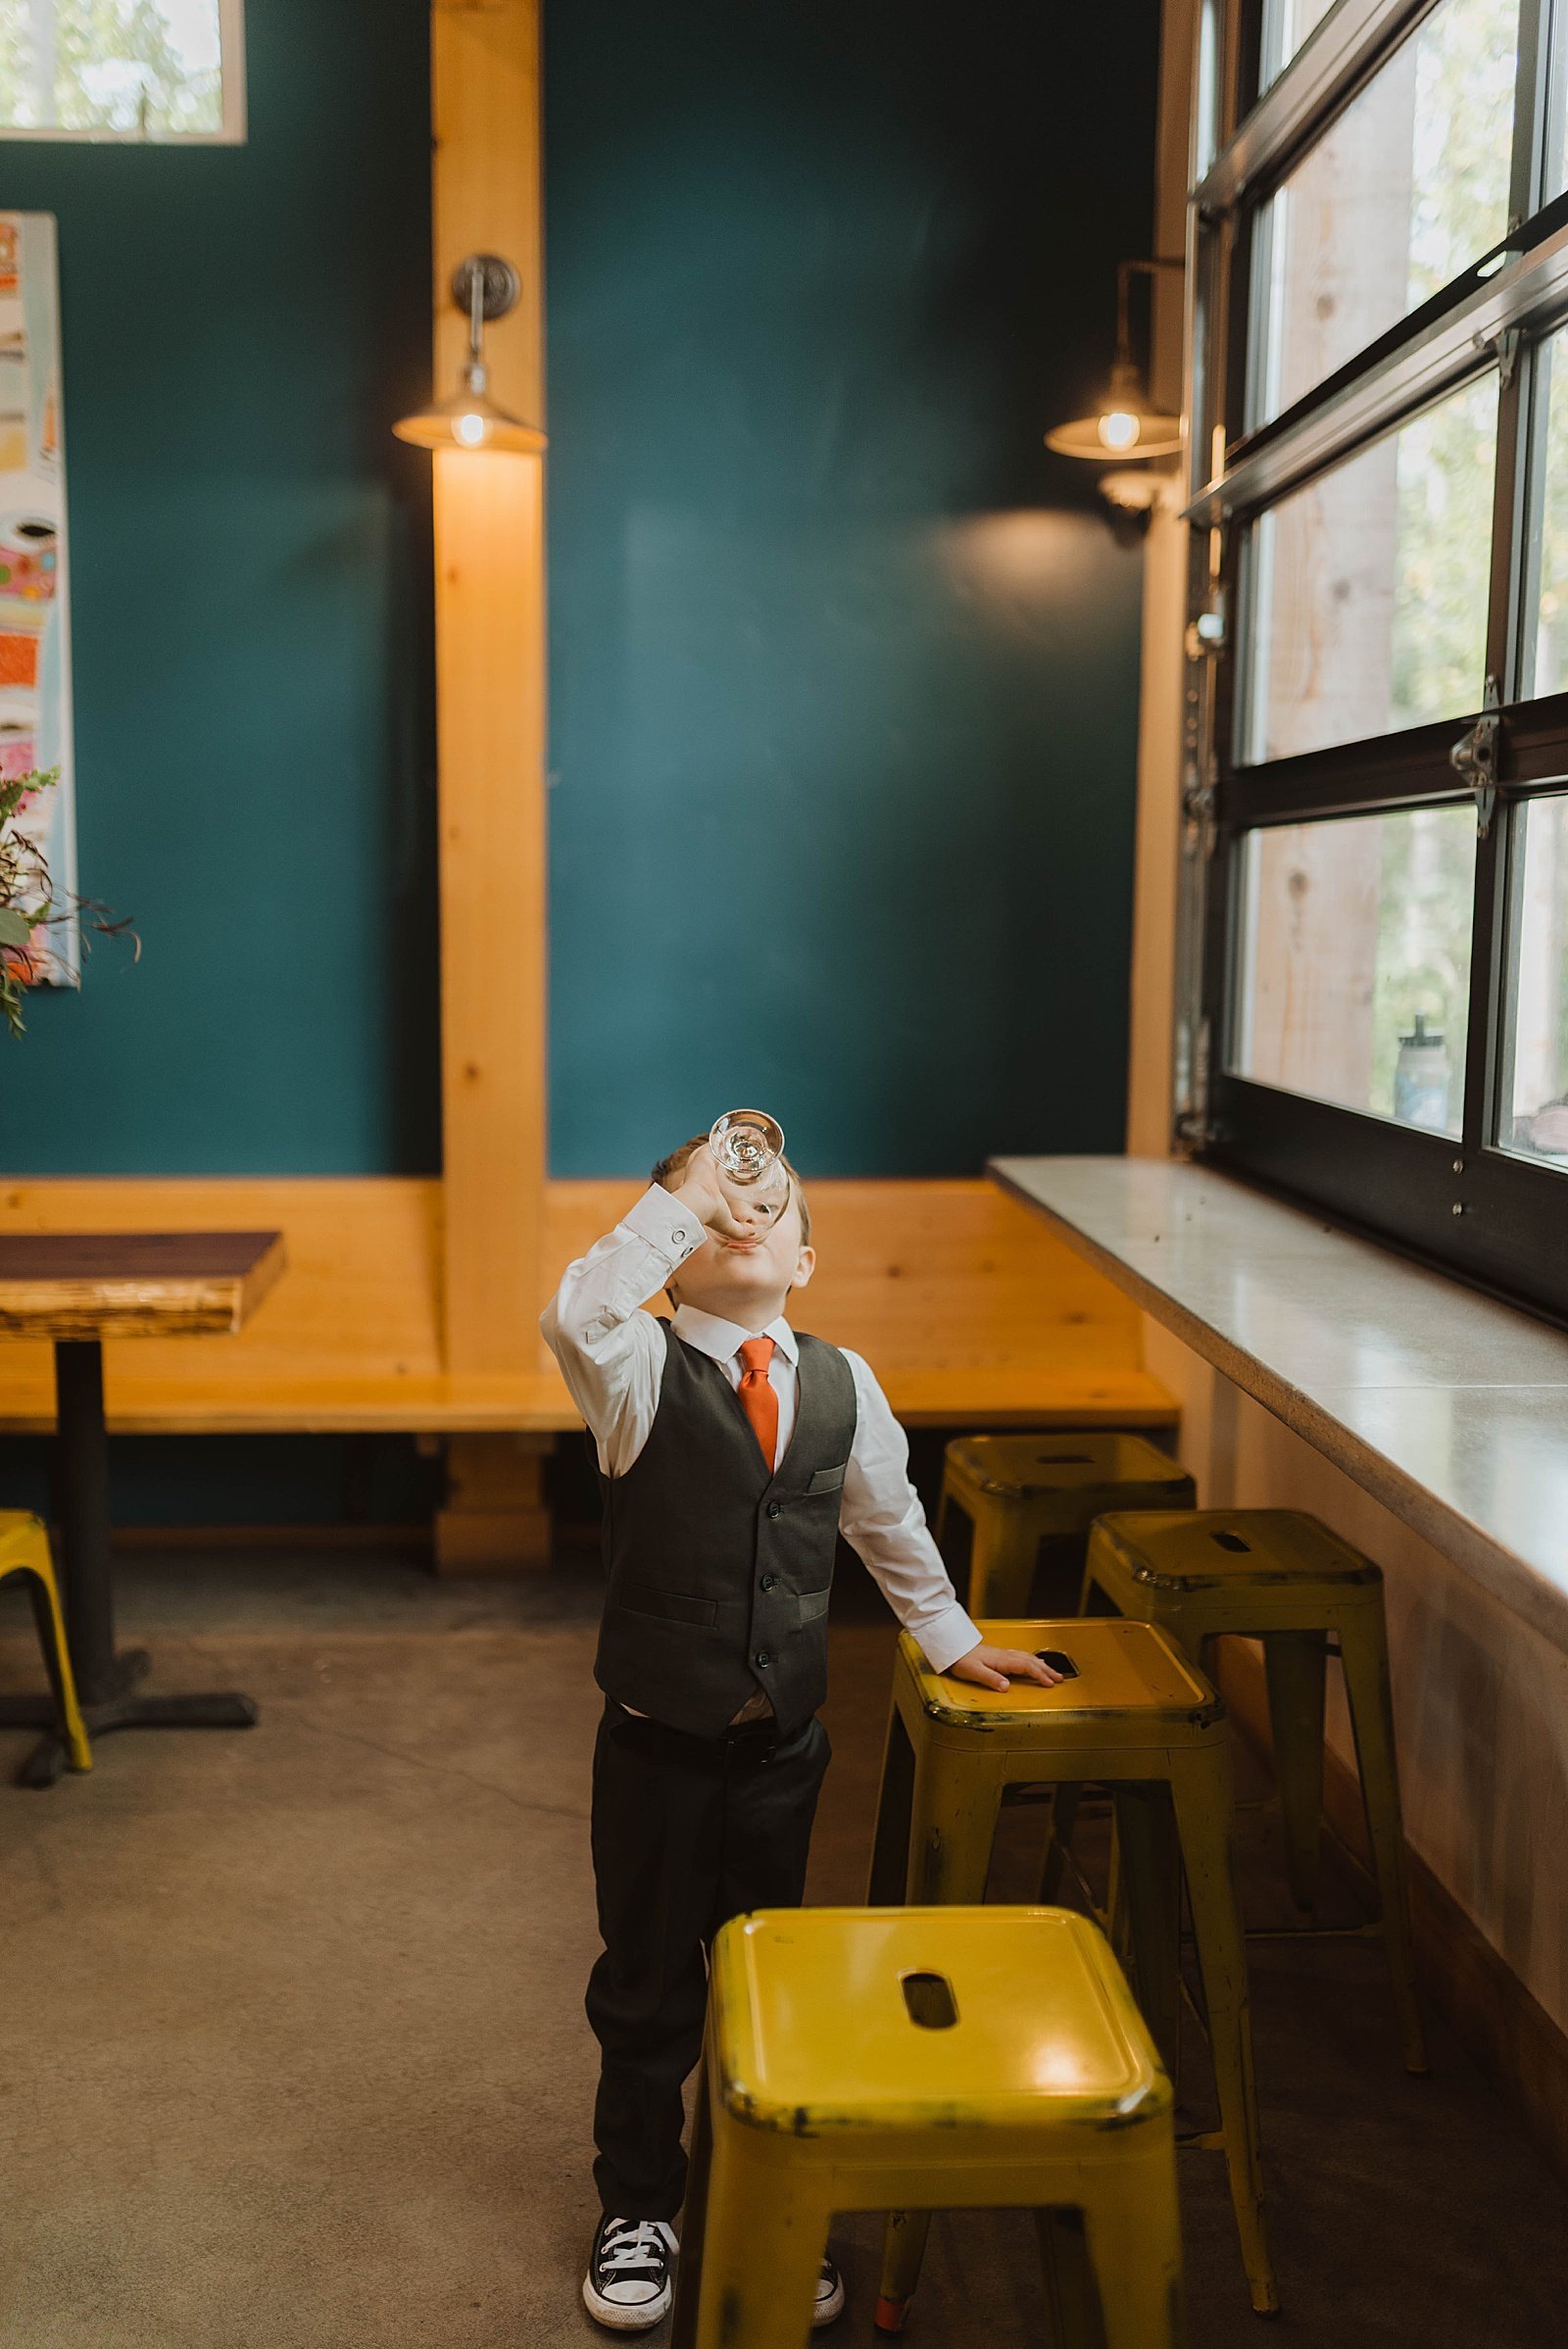  Toddler sipping root beer at a brewery in Alaska during his parents wedding  